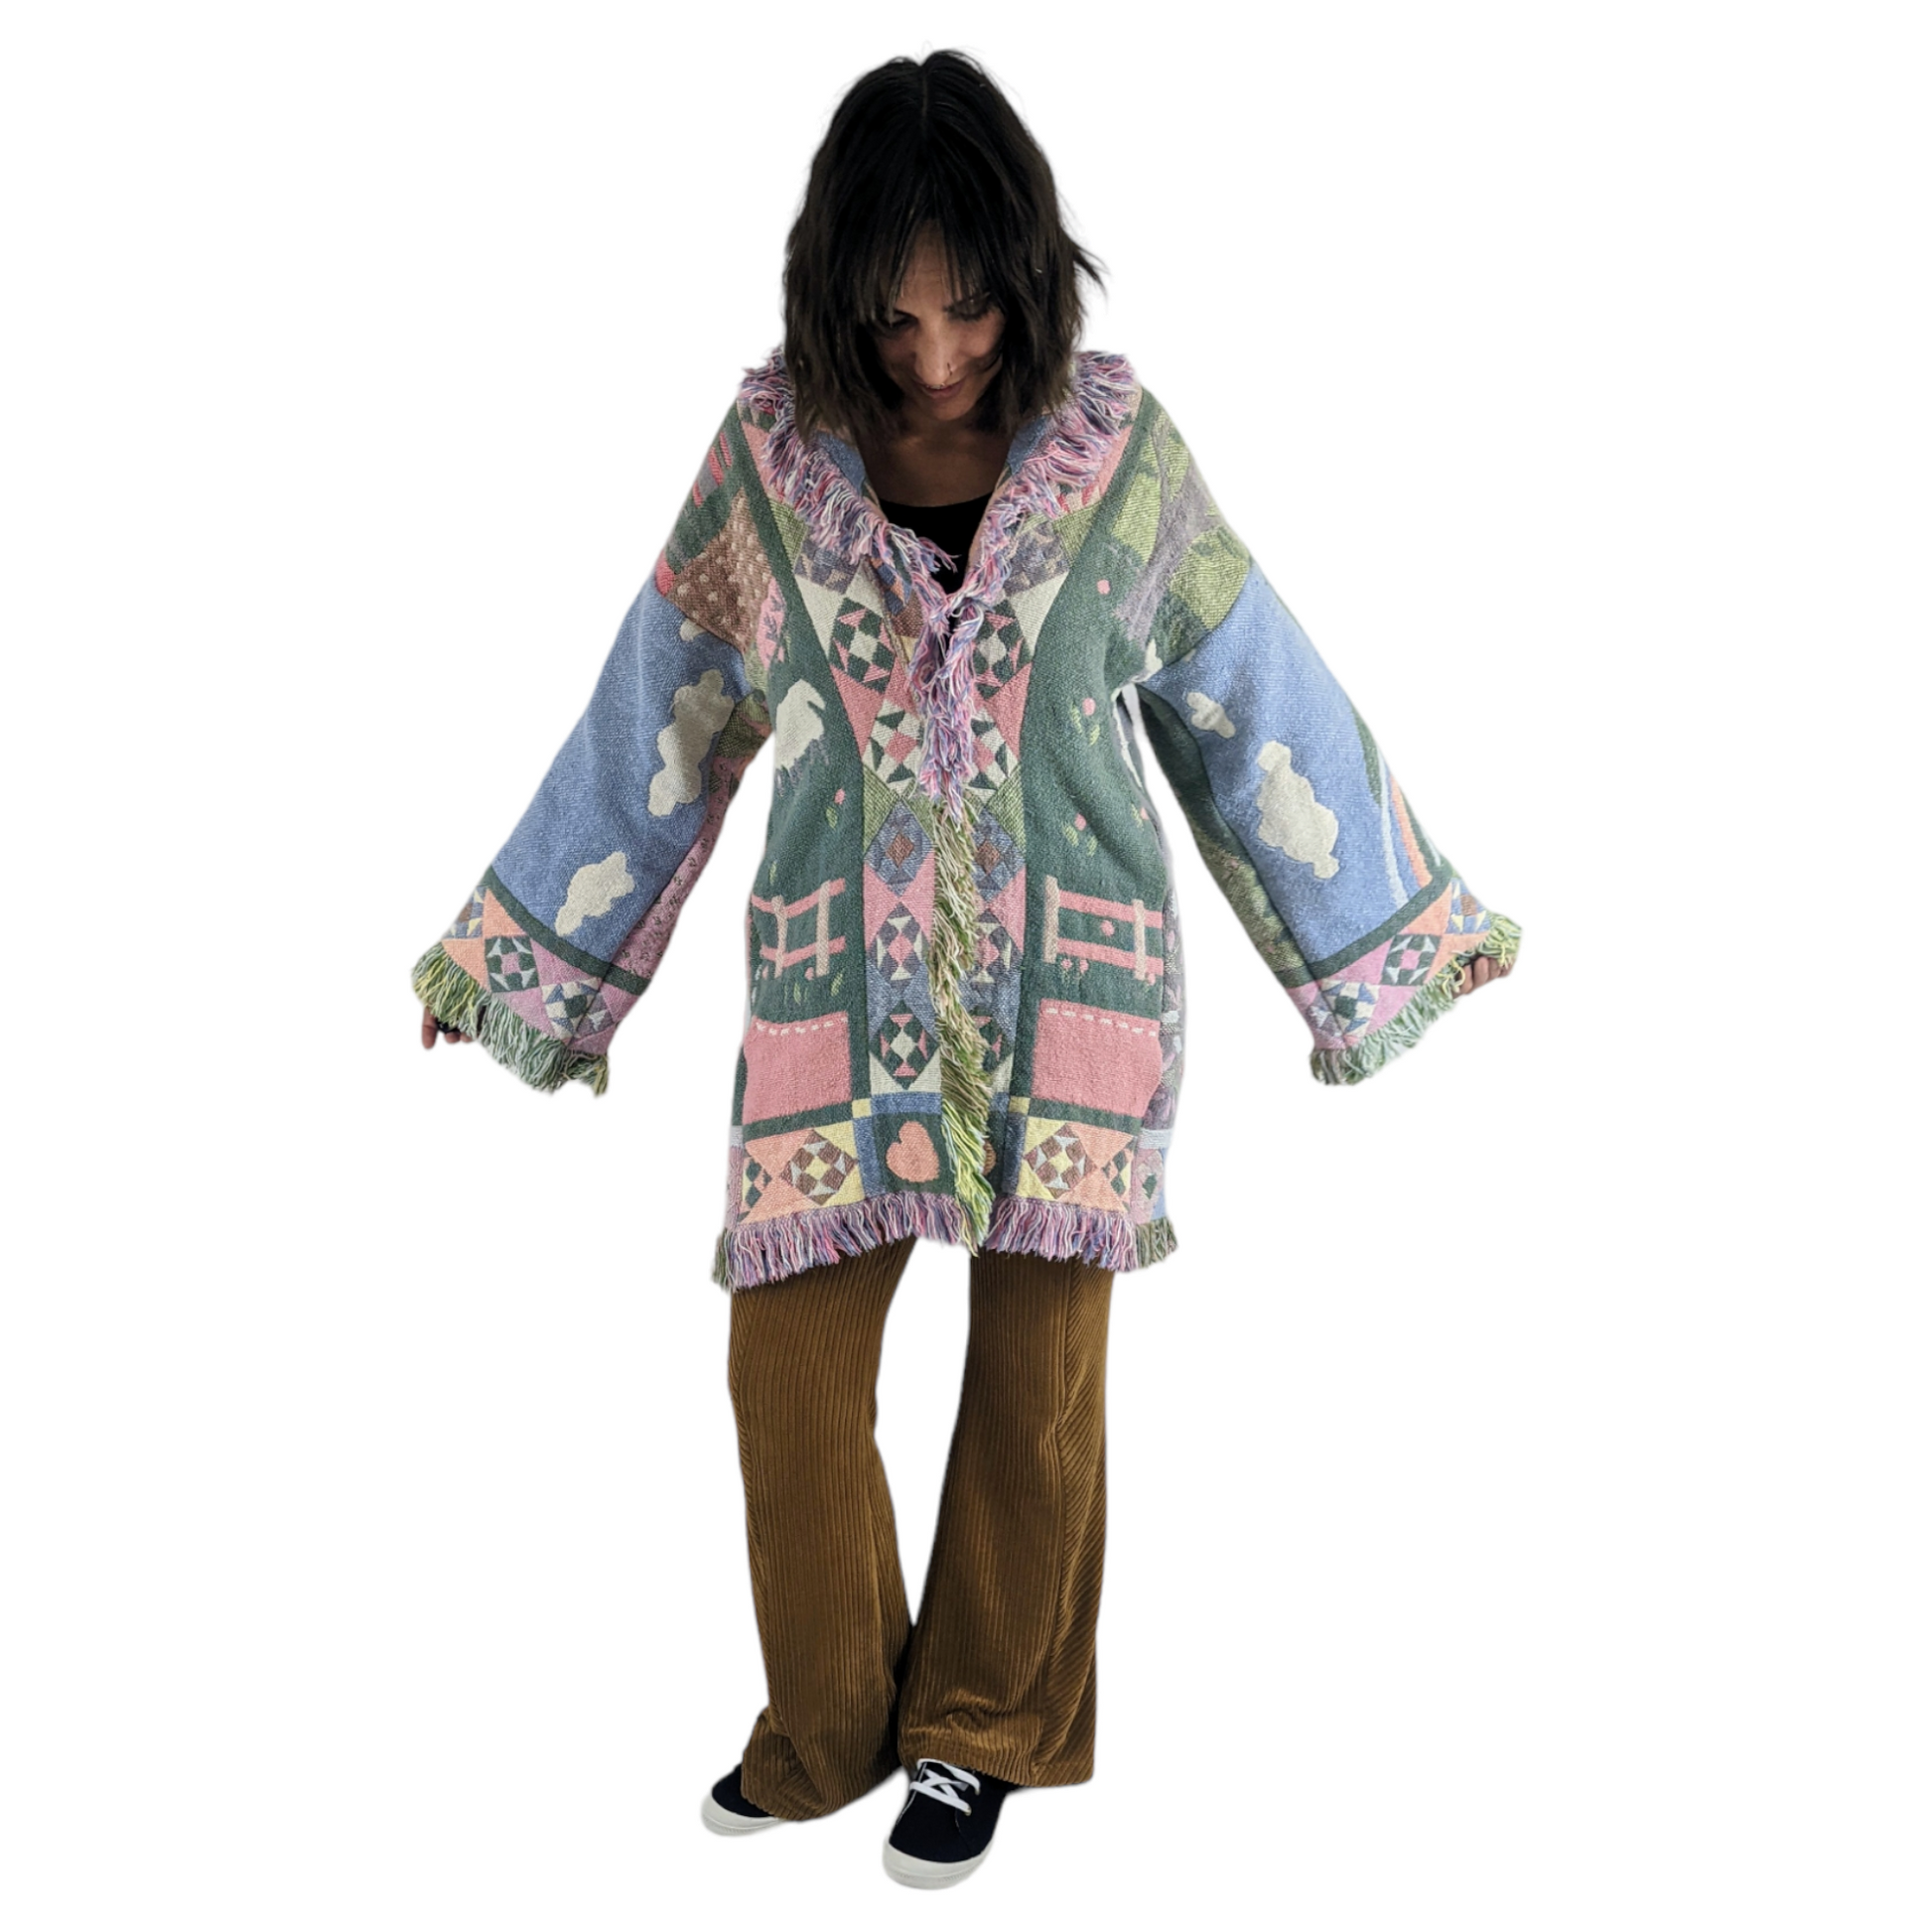 Front view of woman wearing blanket coat with patchwork quilt pattern.